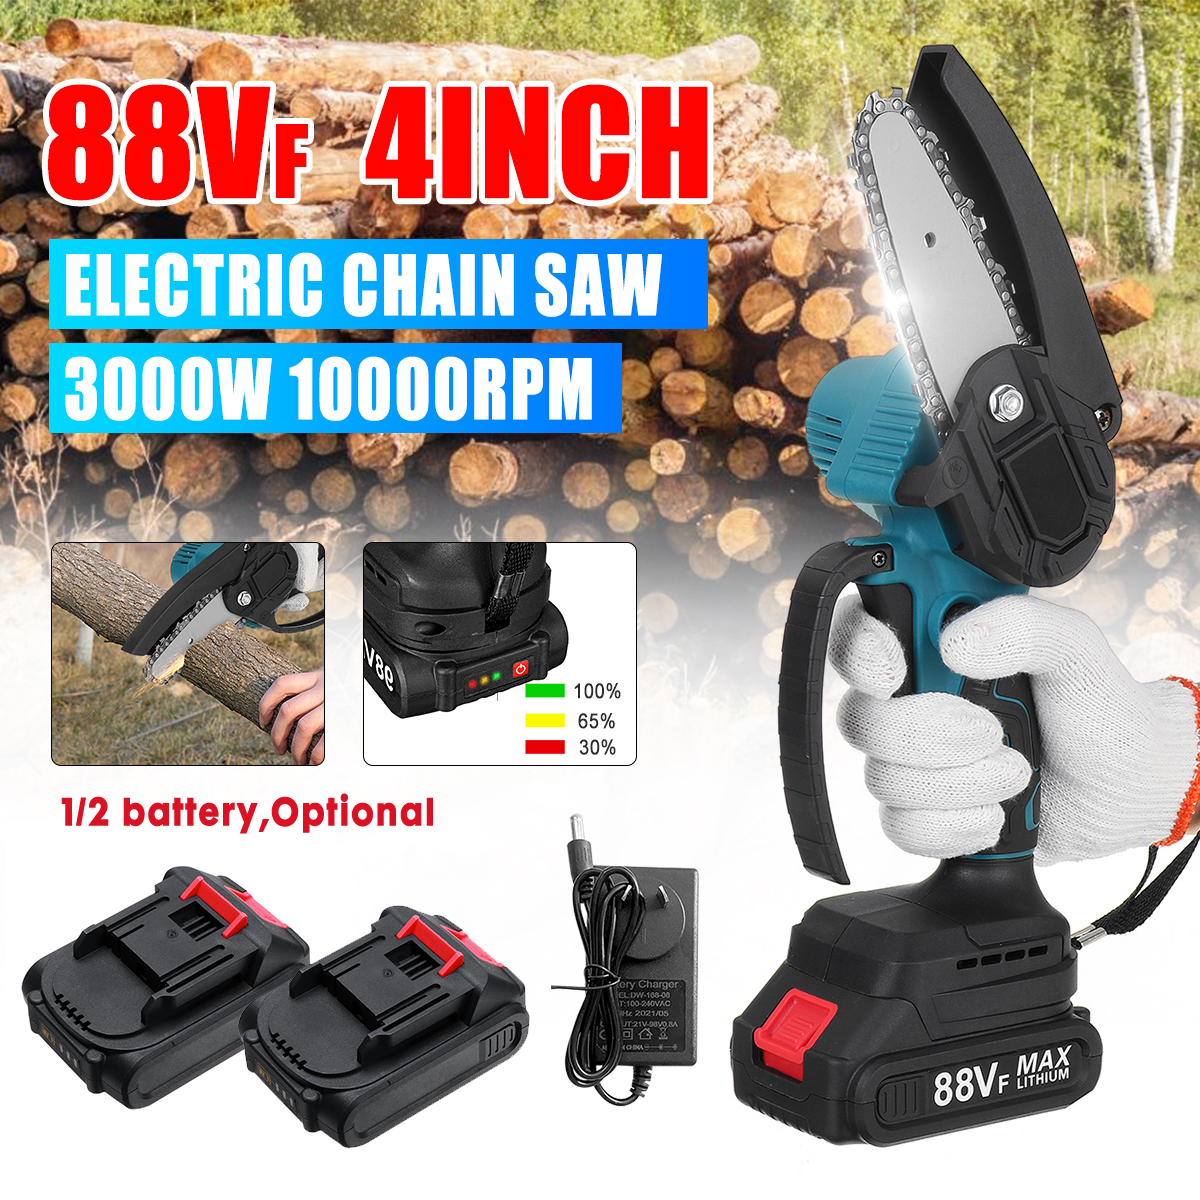 4quot-88VF-Cordless-Electric-Chainsaw-Rechargeable-Woodworking-Saw-Wood-Cutter-W-None12-Battery-For--1856704-1